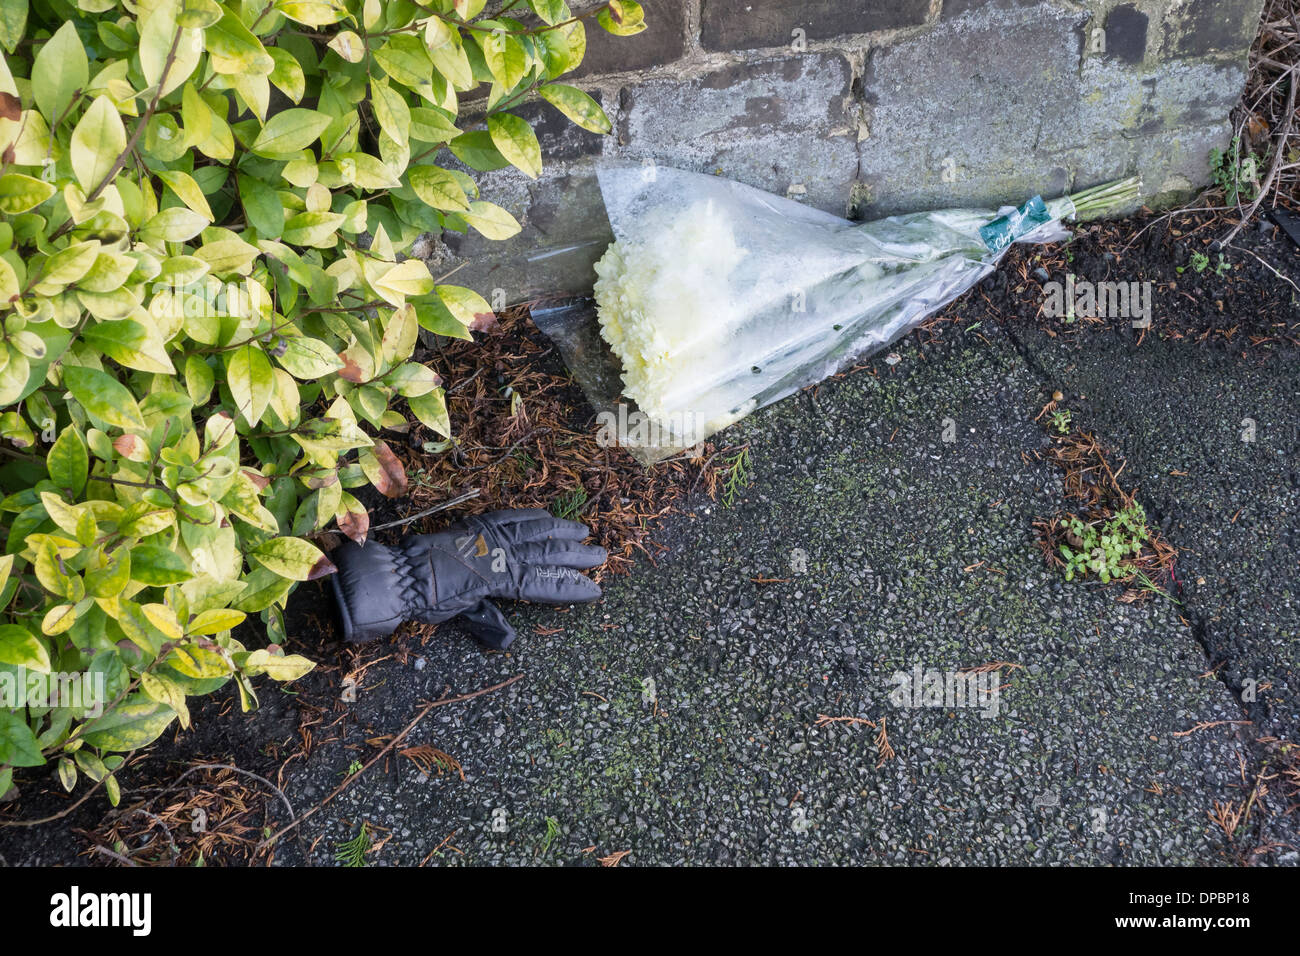 Dropped bunch of flowers and glove Stock Photo